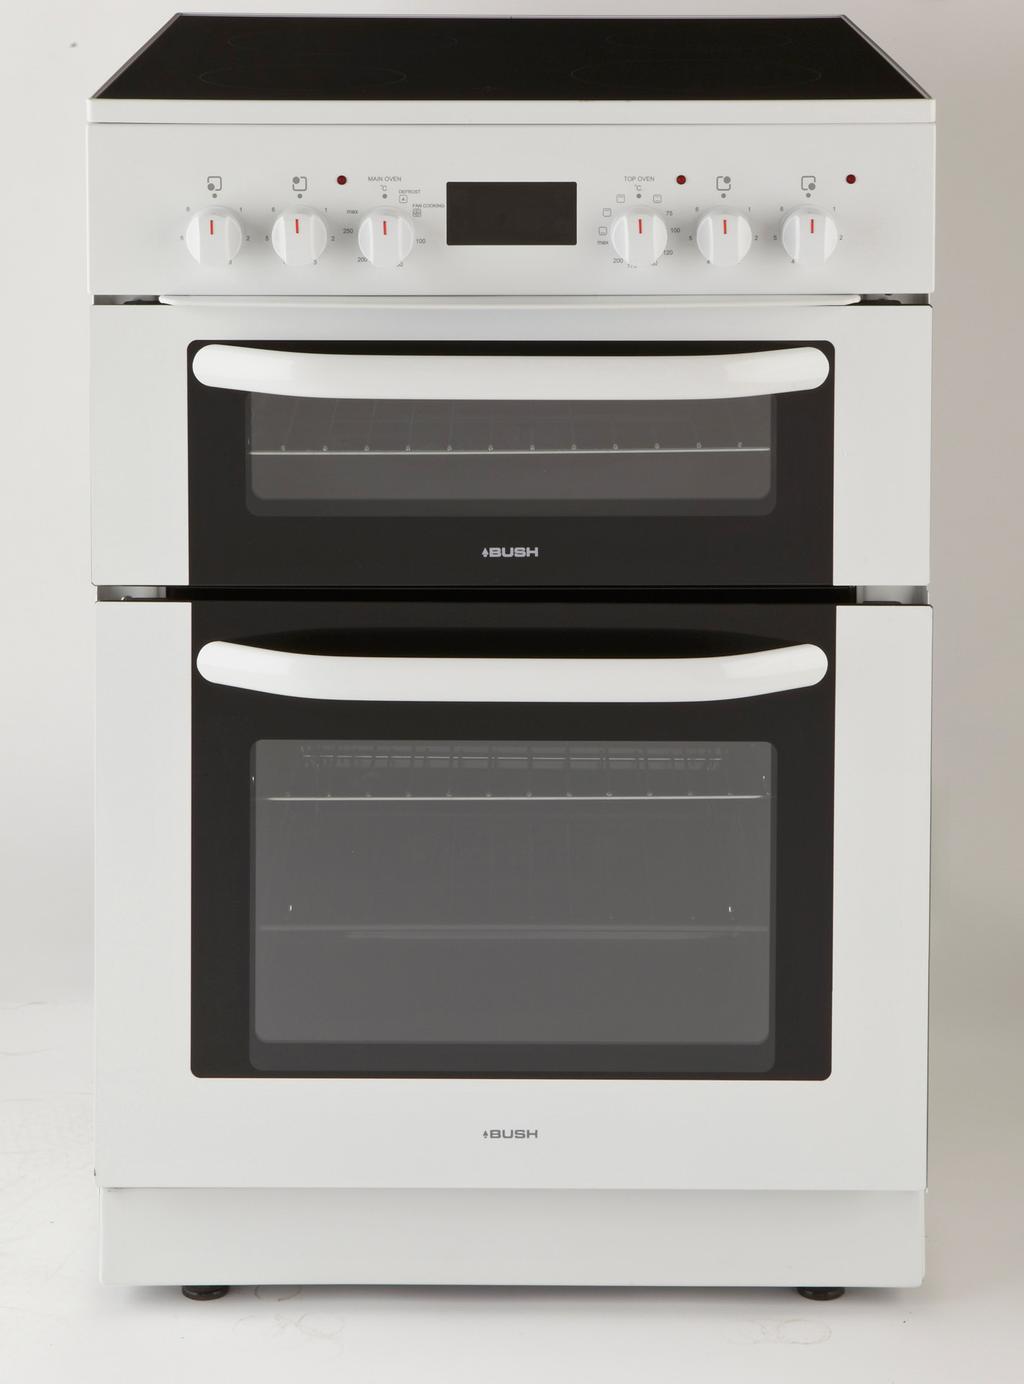 Contents Safety Information Parts Installation Positioning Fixing to the wall Electrical connection User Instructions Using the hob Cookware selection Using the main oven Using the top oven Timer and